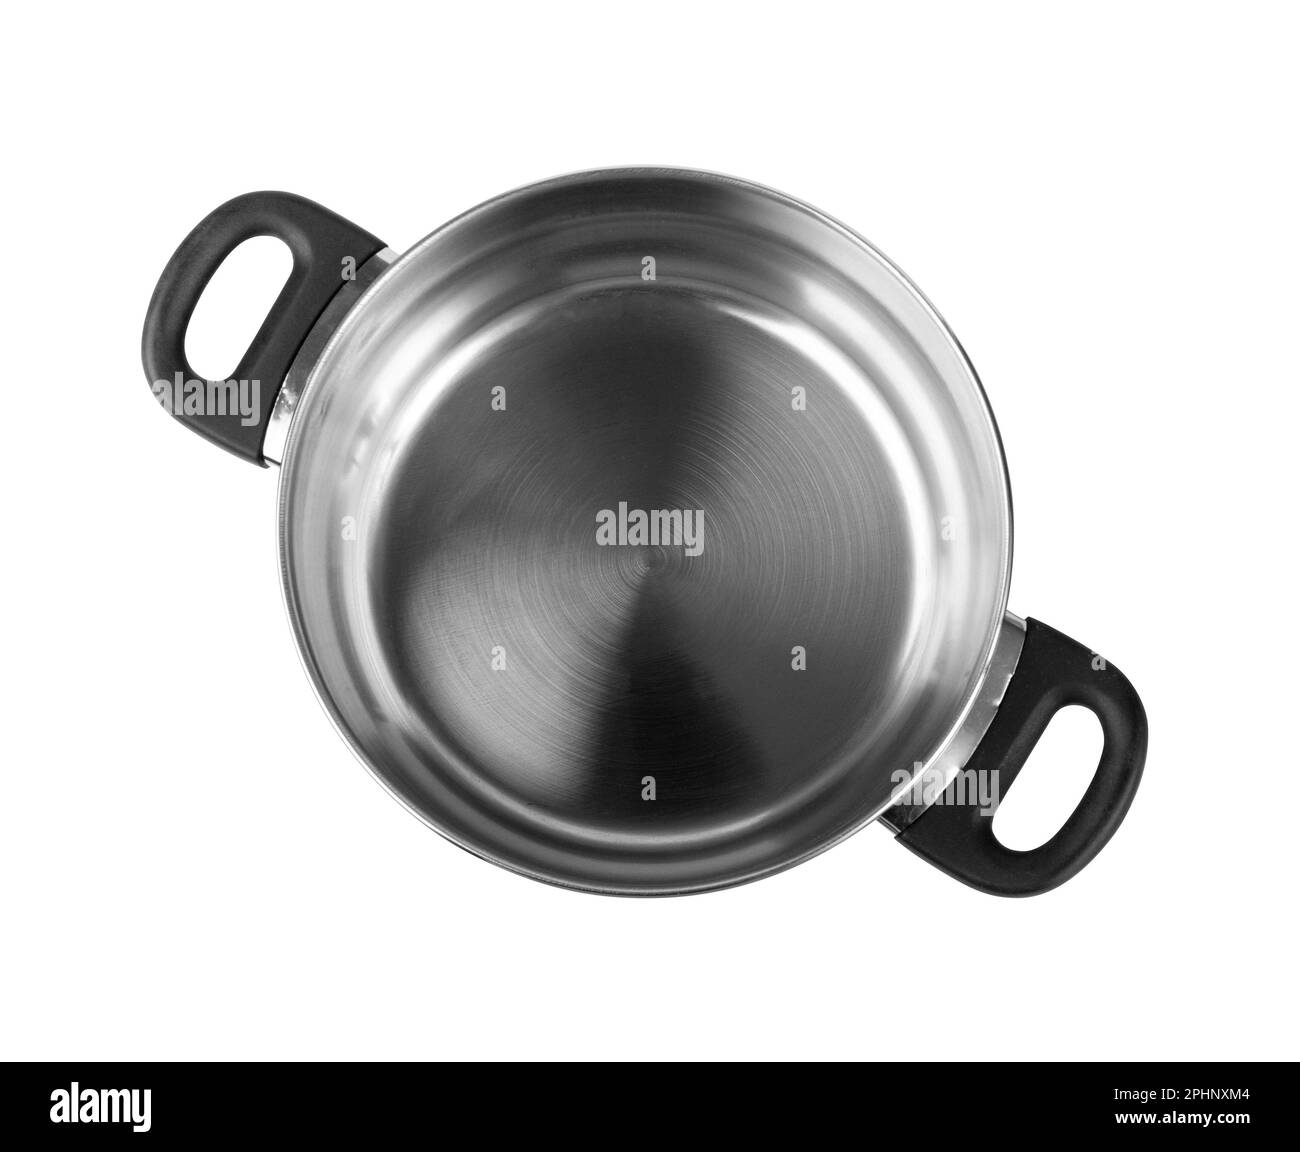 New open cooking pot isolated, Empty metal saucepan, soup kitchenware, shiny stainless cooking pot on white background, top view, clipping path Stock Photo